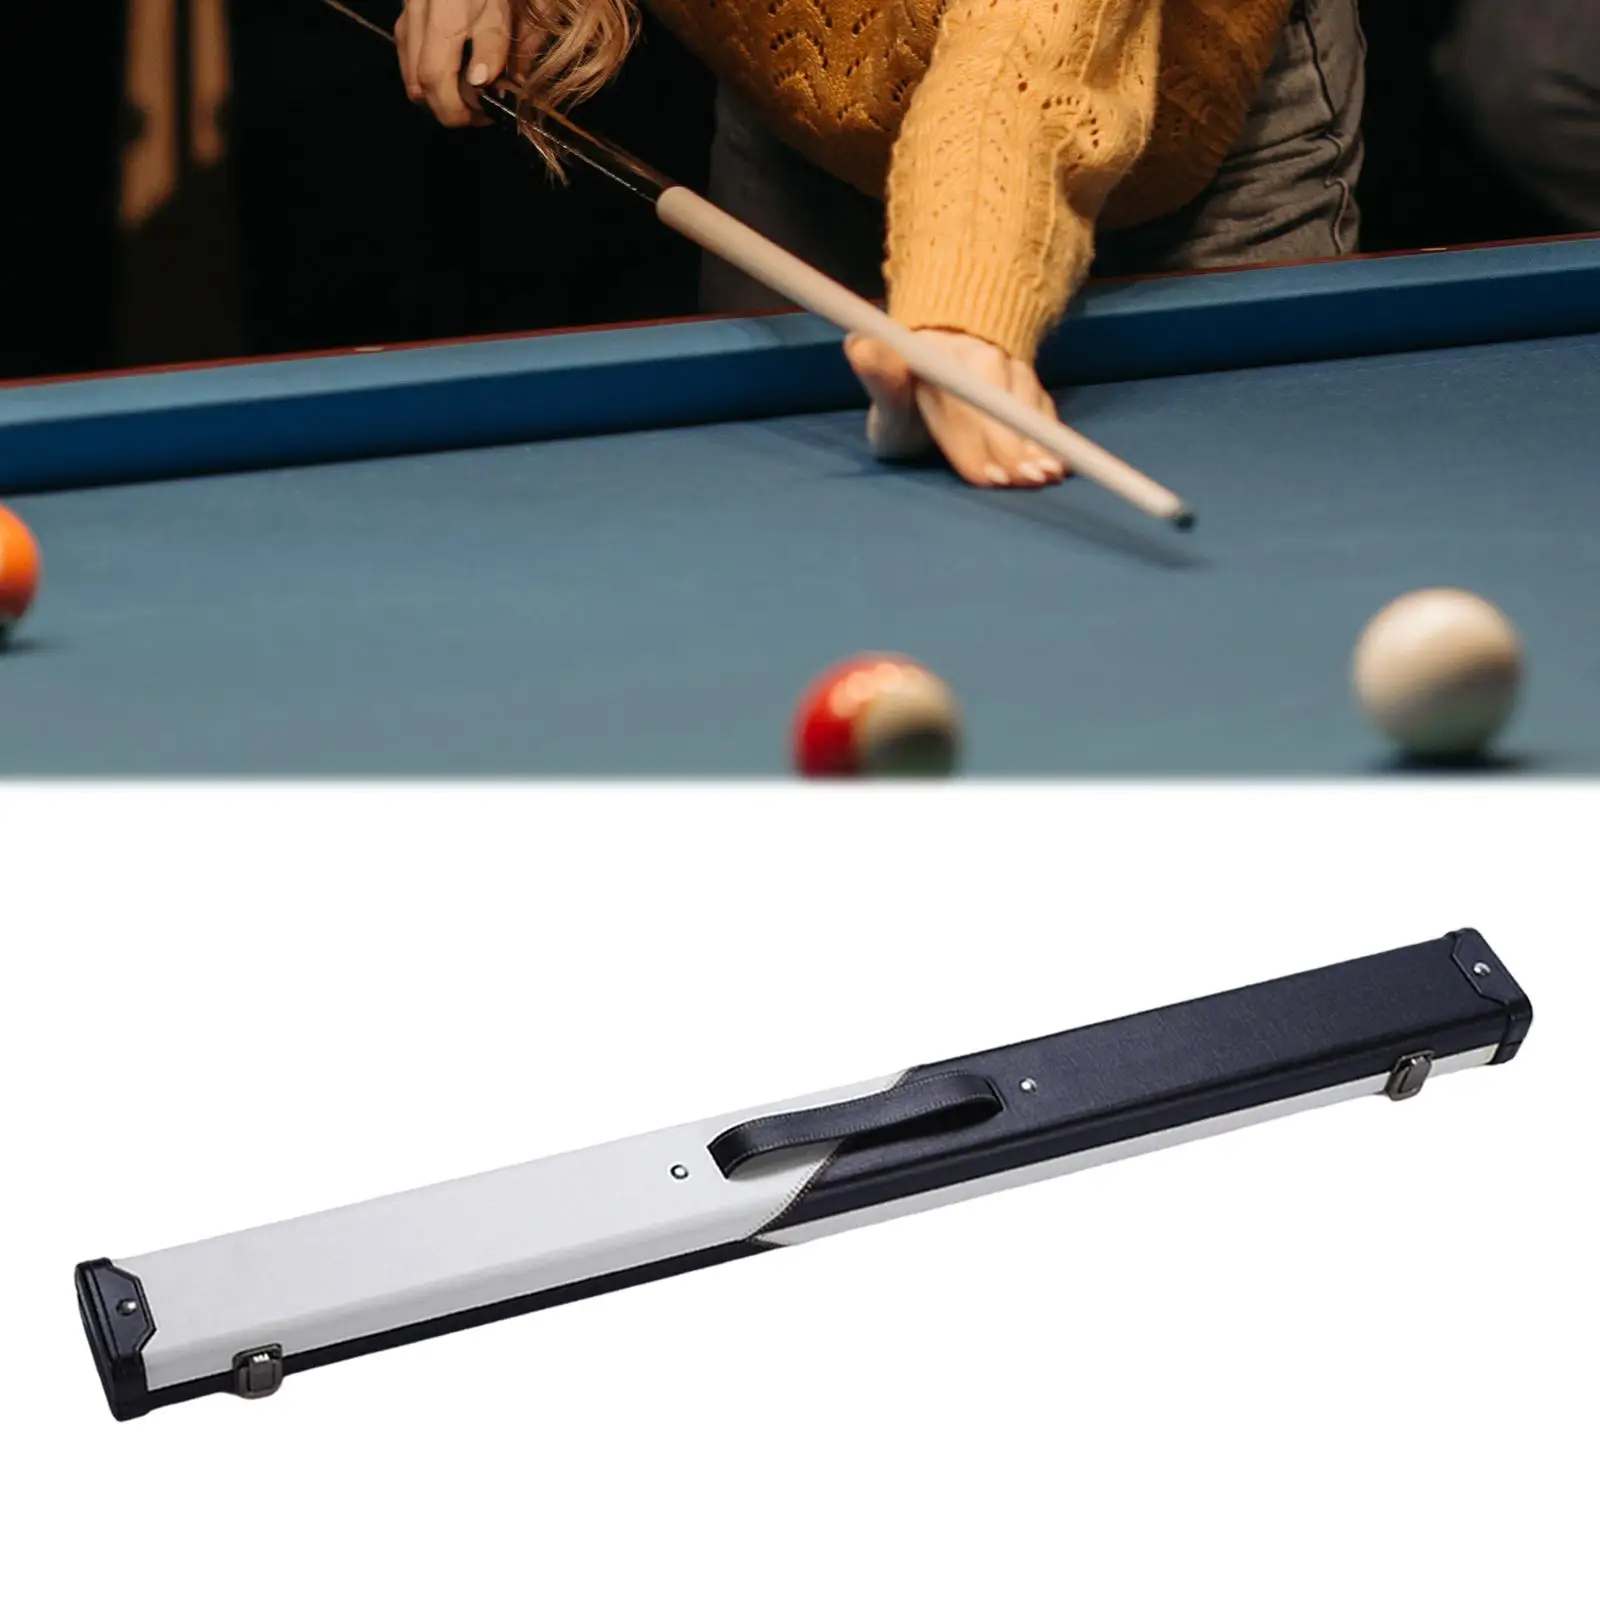 Billiards Pool Hard Case Holds Shaft Carrying Box for 1/2 Snooker